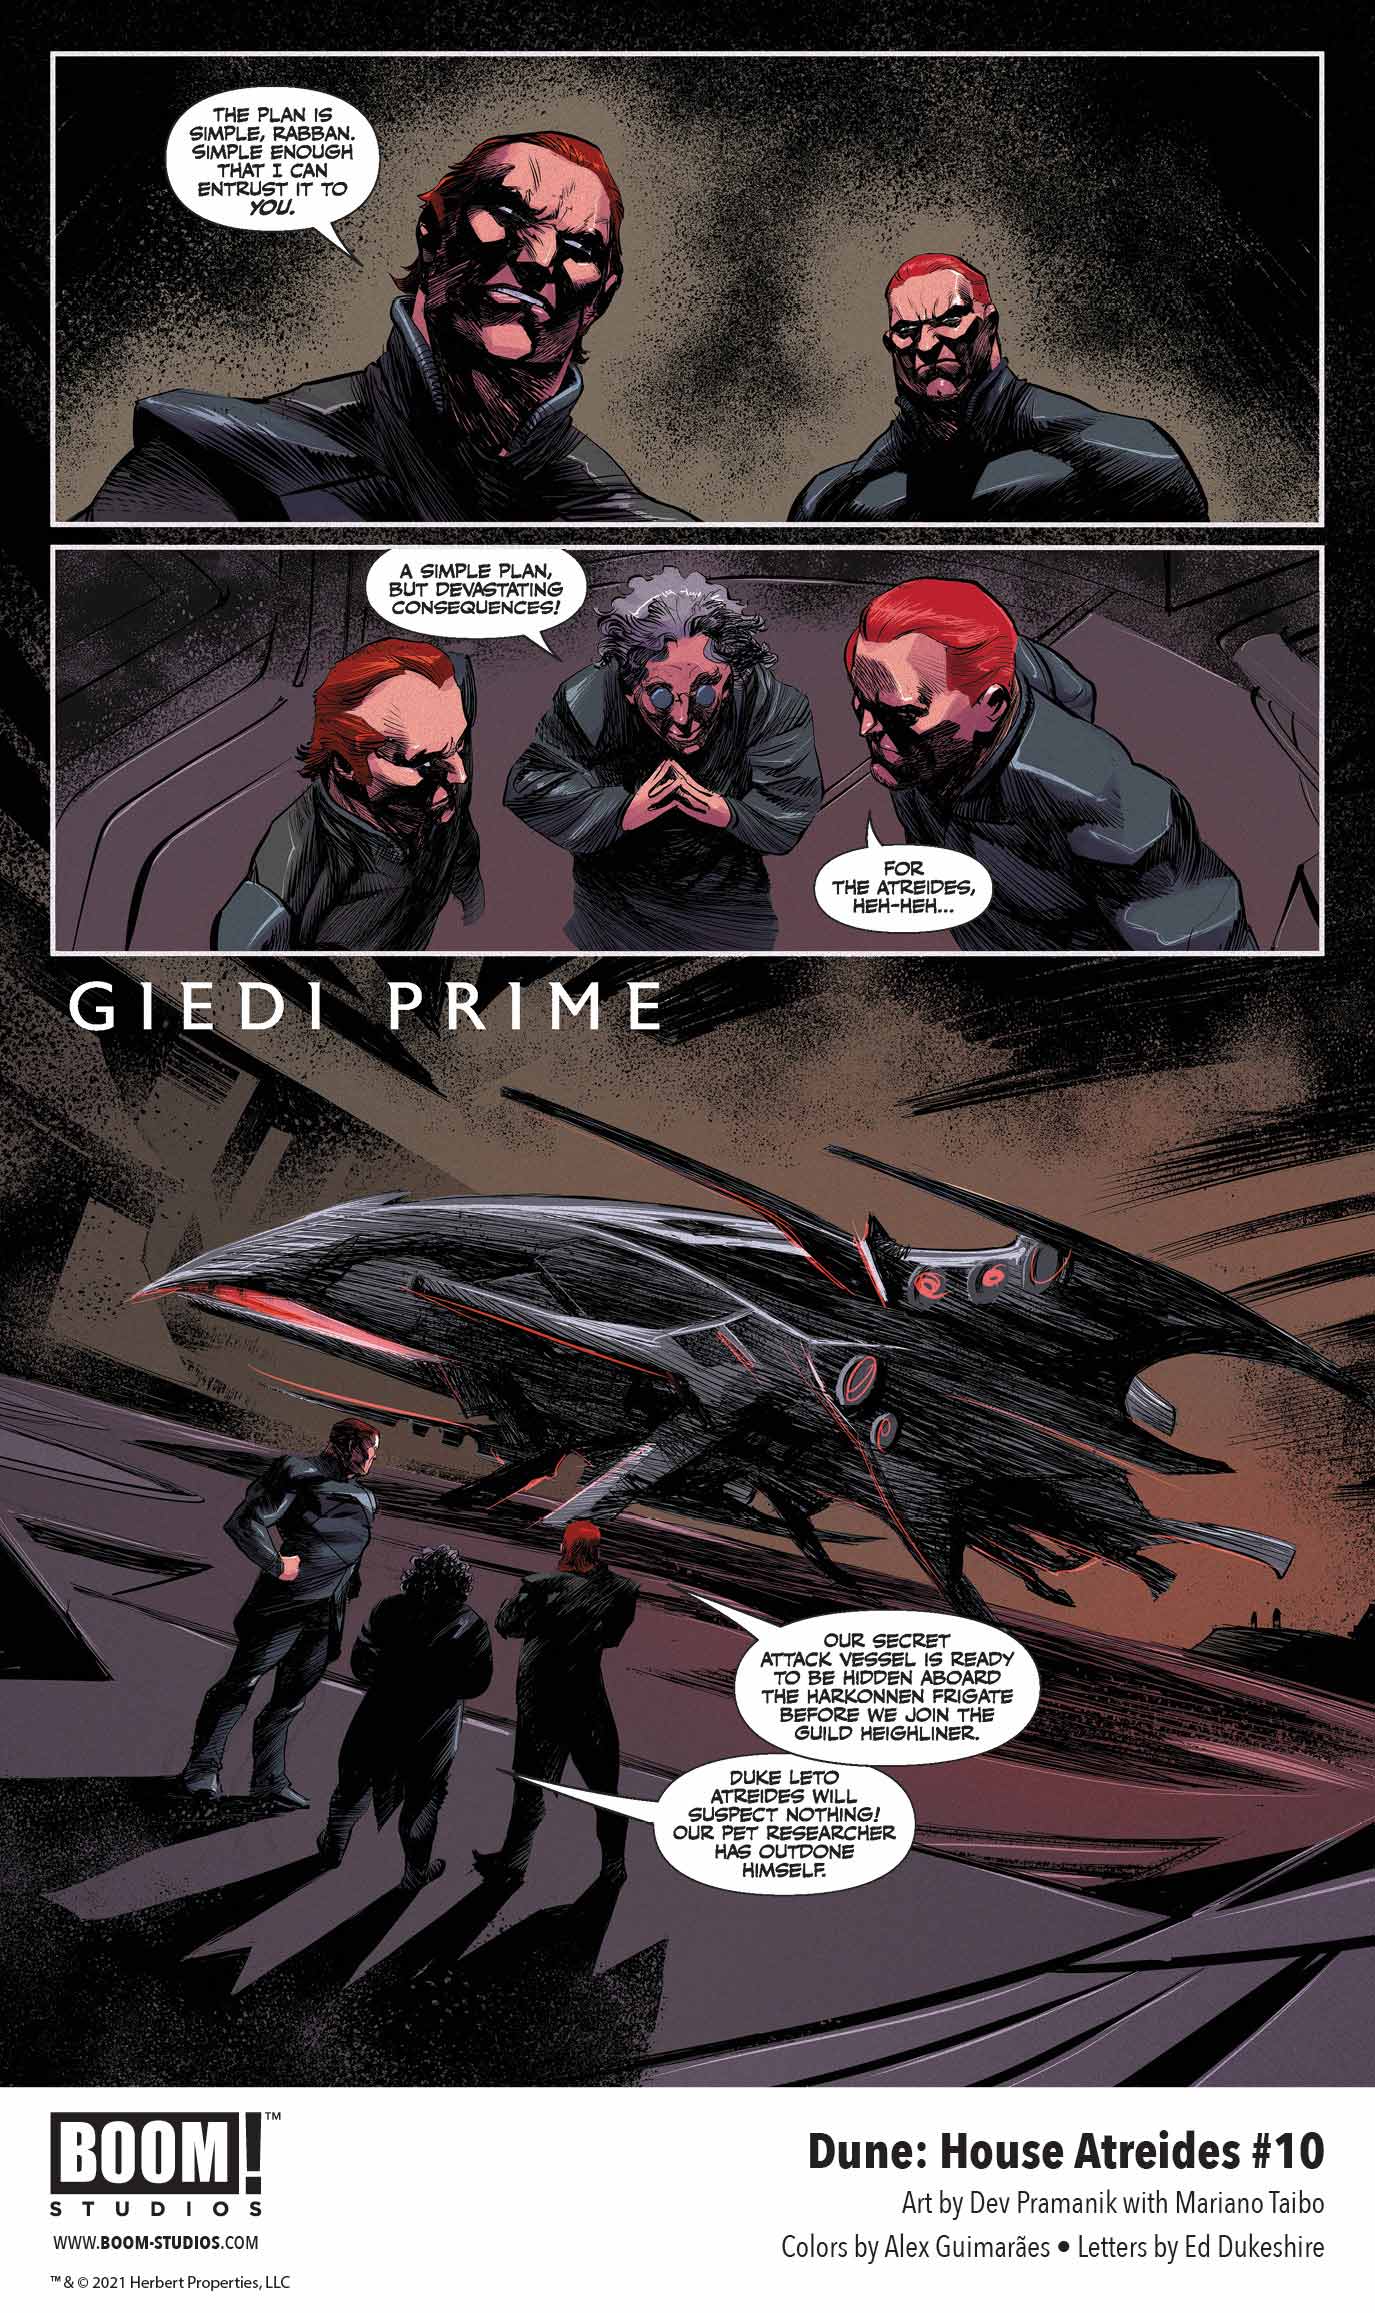 Dune: House Atreides comic series. Issue #10, preview page 5.